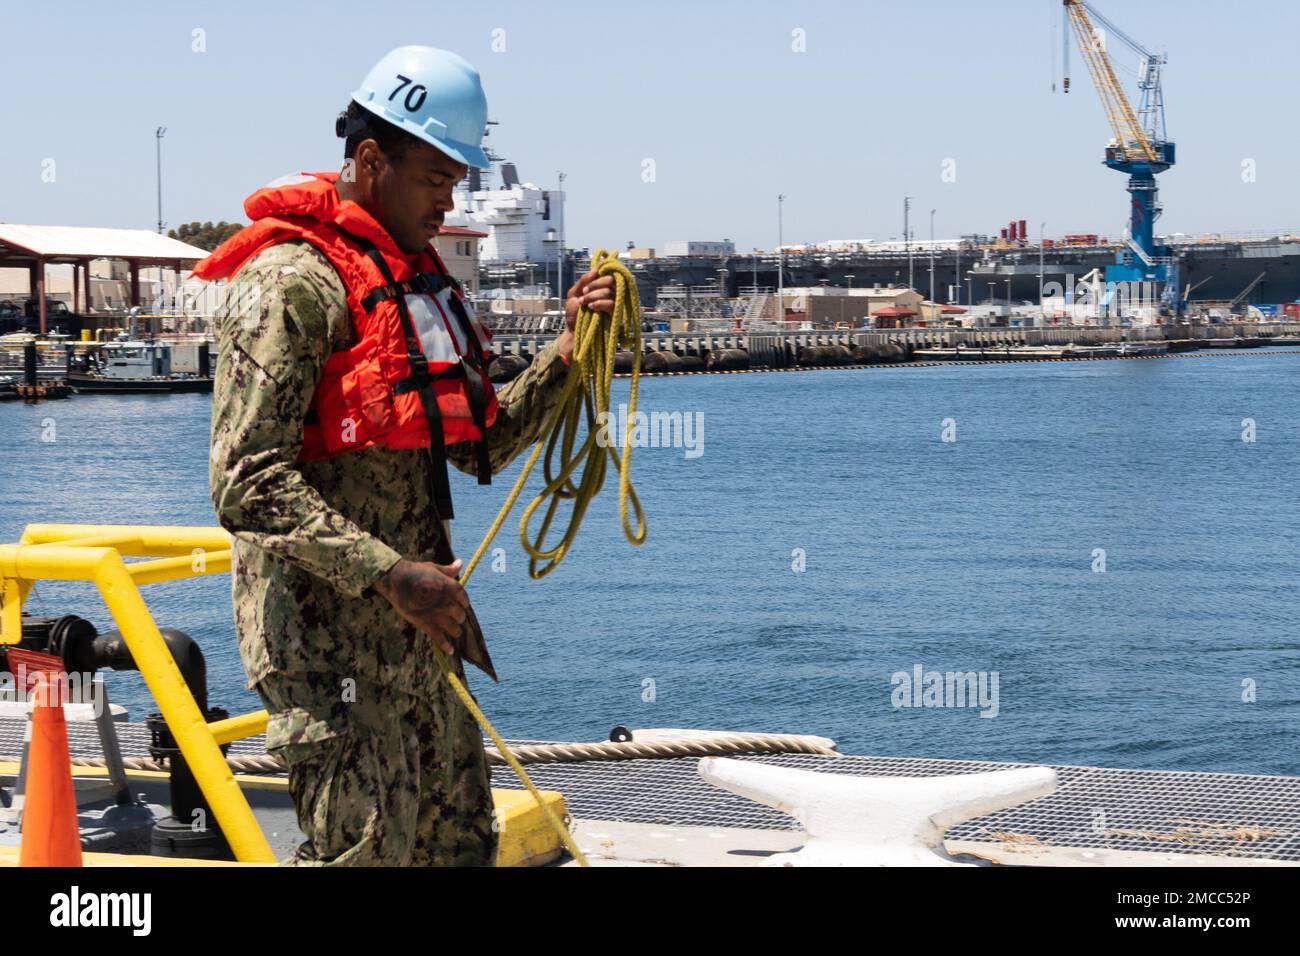 220629-N-KD380-2147   SAN DIEGO (June 29, 2022) – Aviation Boatswain’s Mate (Fuels) Airman Justin Thomas-Thornton handles line as the San Antonio-class amphibious transport dock ship USS Portland (LPD 27) pier-side onboard Naval Air Station North Island to participate in Rim of the Pacific (RIMPAC) 2022 in Southern California. Twenty-six nations, 38 ships, four submarines, more than 170 aircraft and 25,000 personnel are participating in RIMPAC from June 29 to Aug. 4 in and around the Hawaiian Islands and Southern California. The world’s largest international maritime exercise, RIMPAC provides Stock Photo